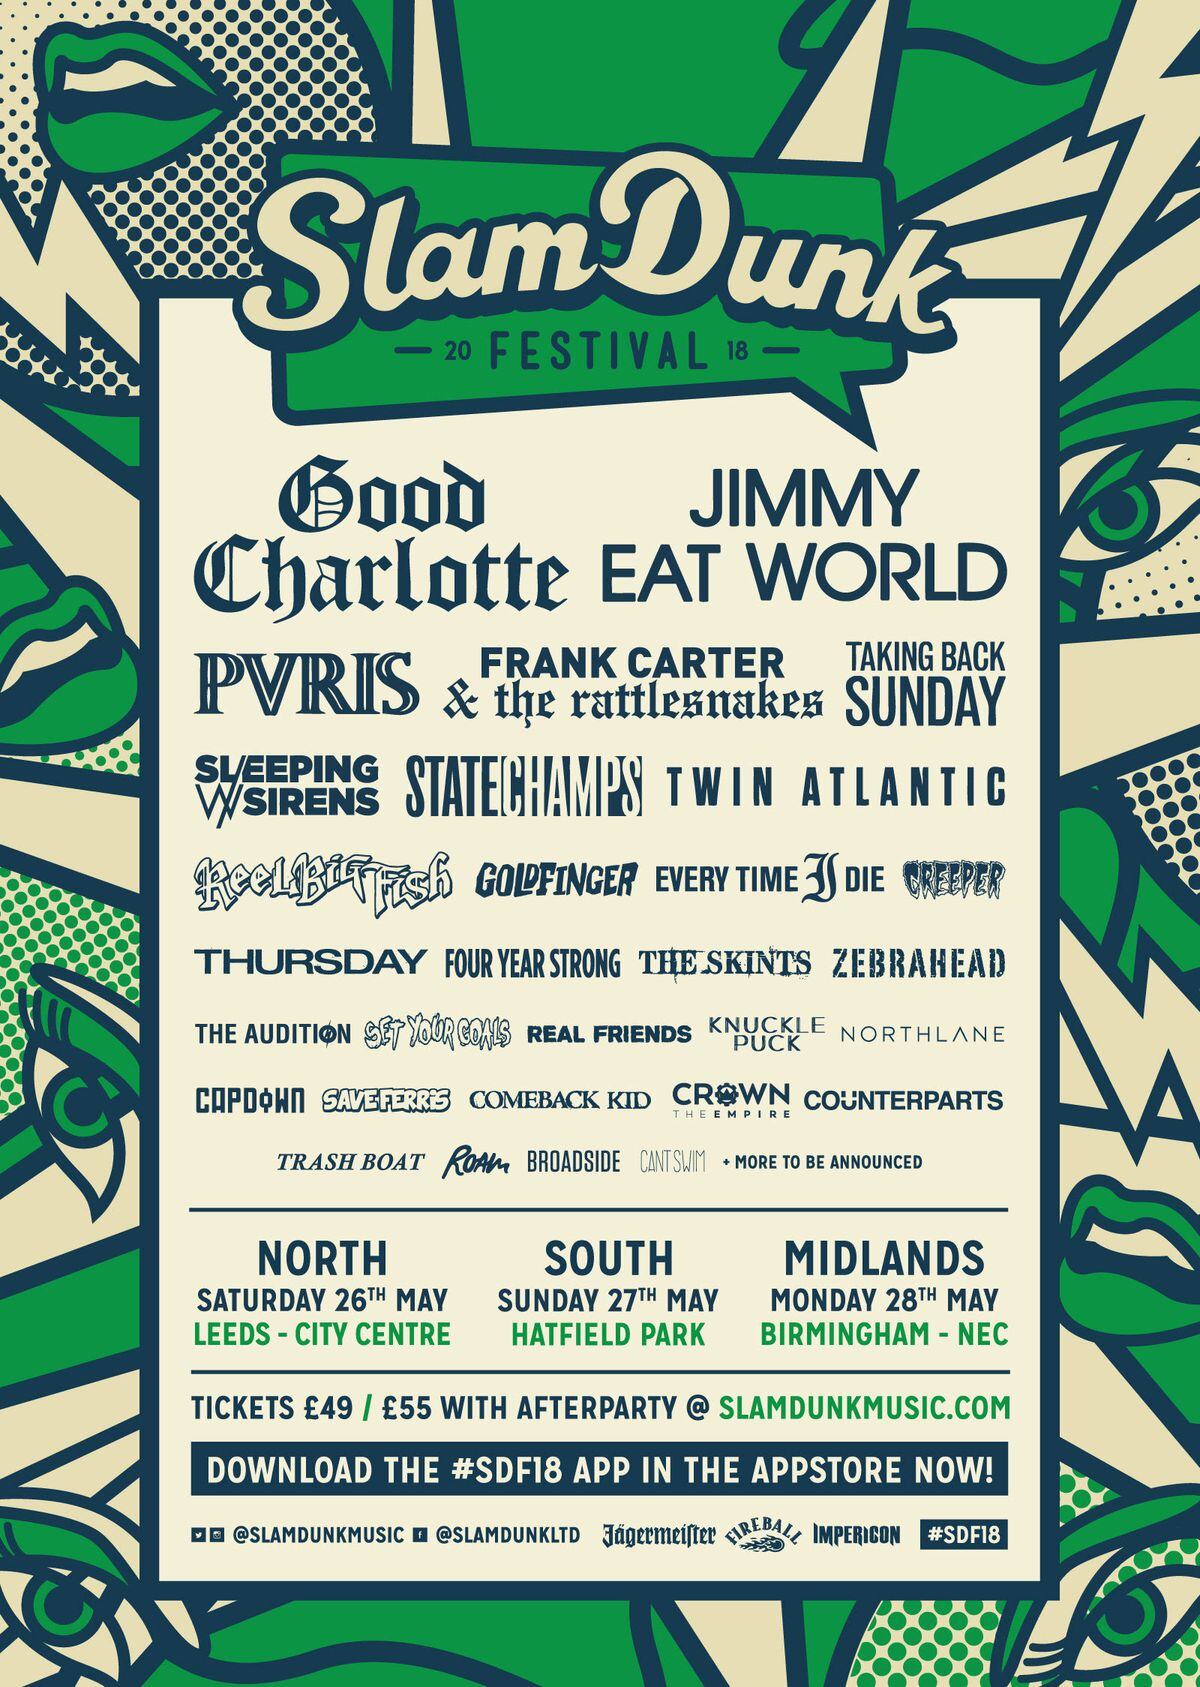 Slam Dunk 18 Reel Big Fish Goldfinger The Audition And Roam Added To Birmingham Event Shropshire Star